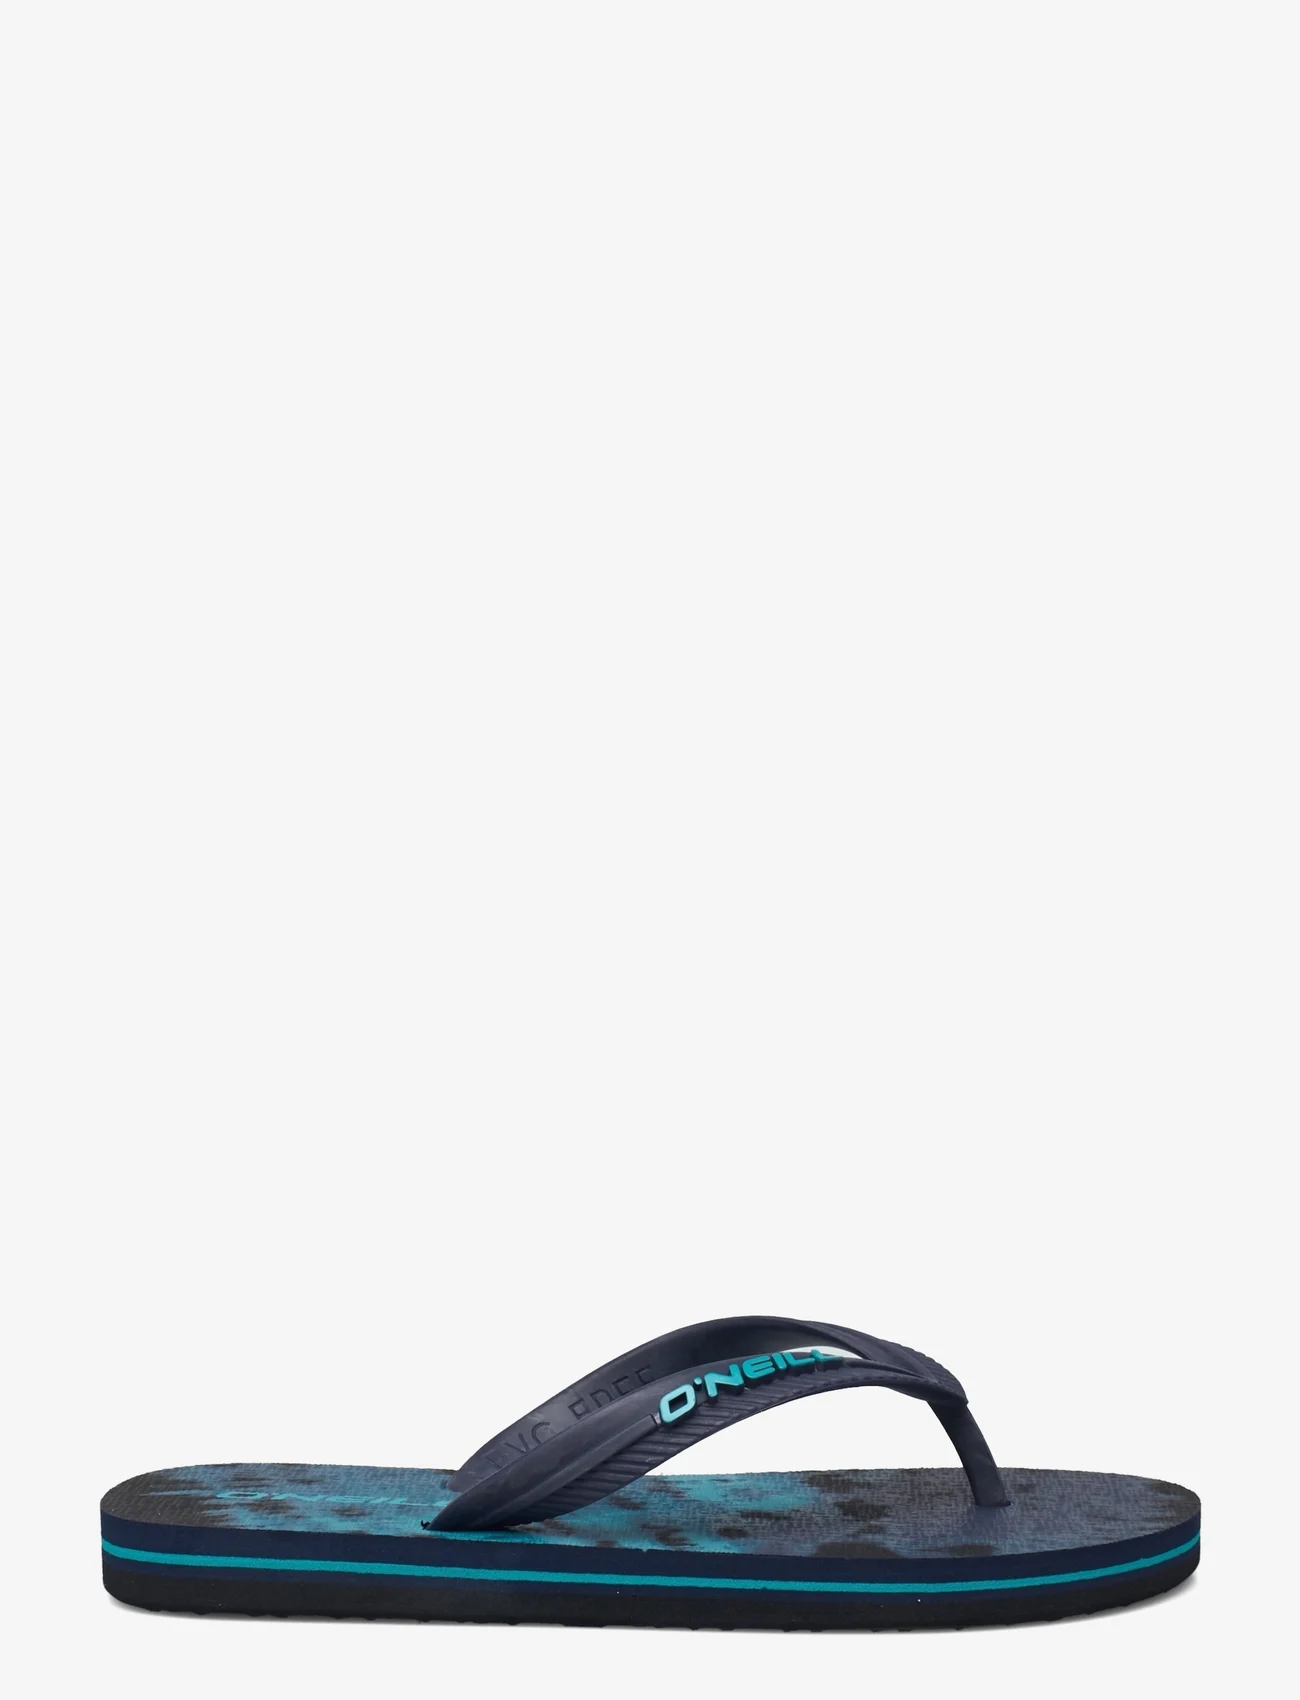 O'neill - PROFILE GRAPHIC SANDALS - sommarfynd - blue ao 12 - 1